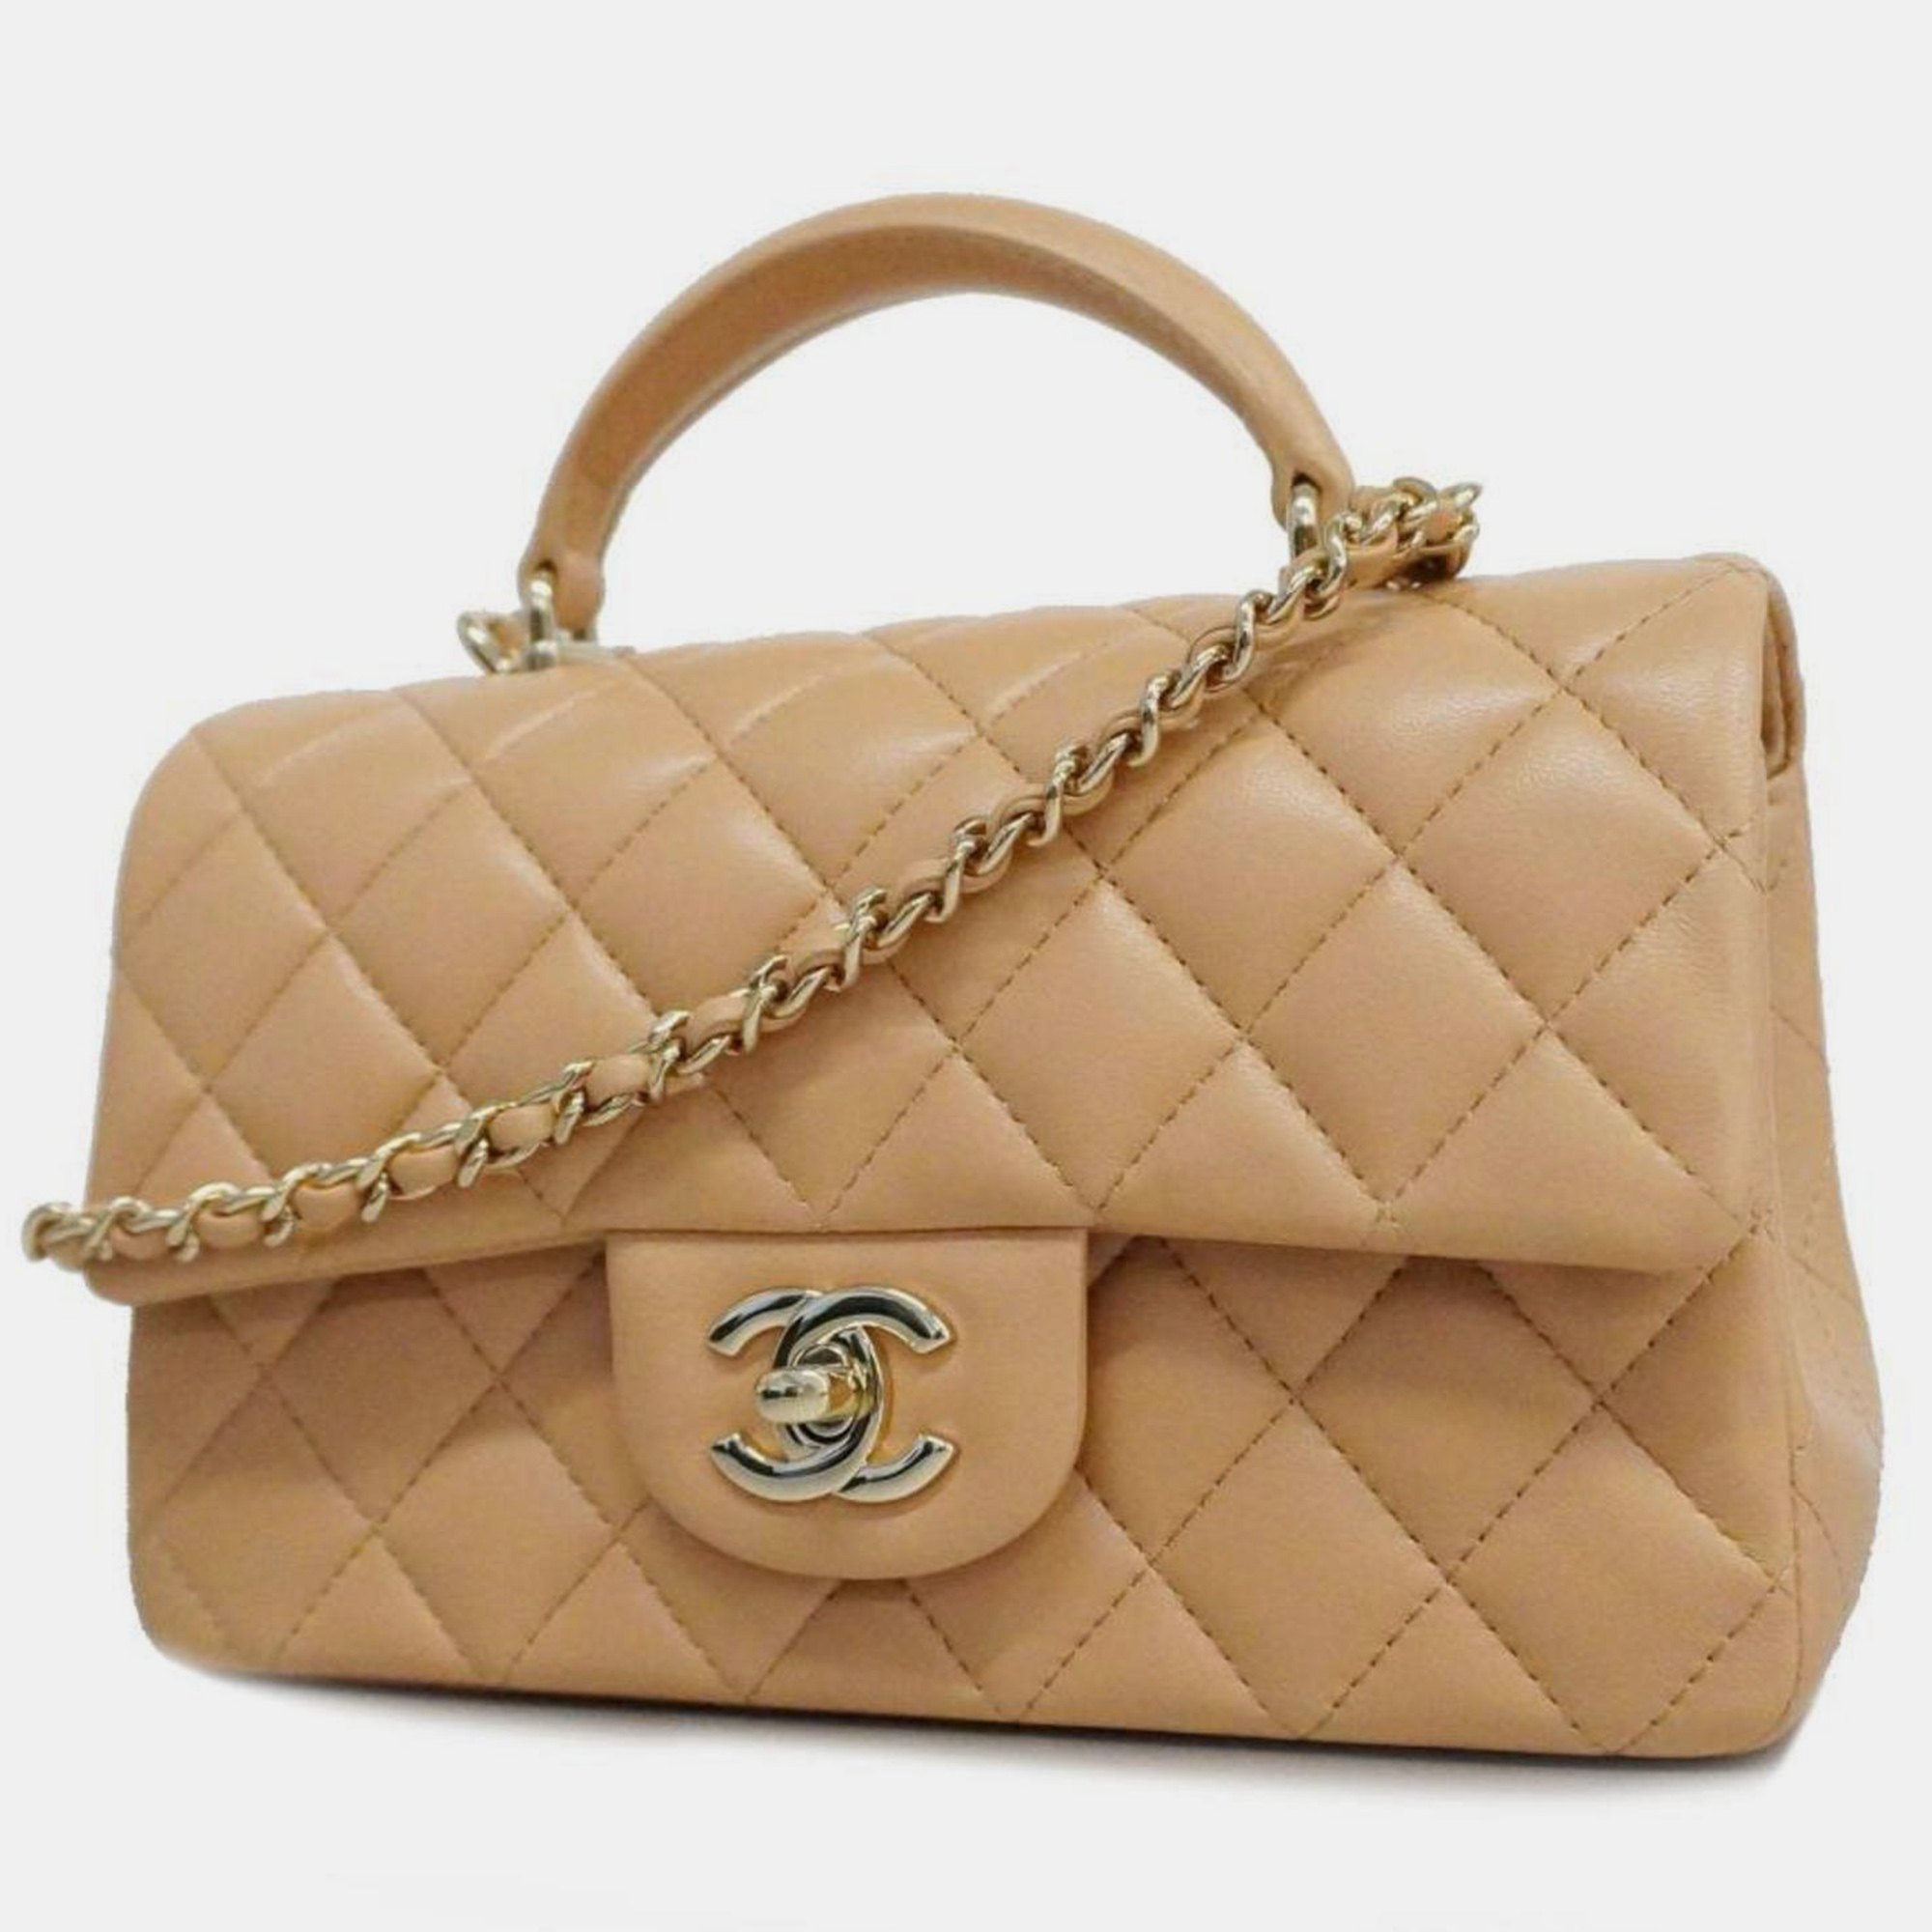 

Chanel Beige Lambskin Leather Flap Bag with Top Handle